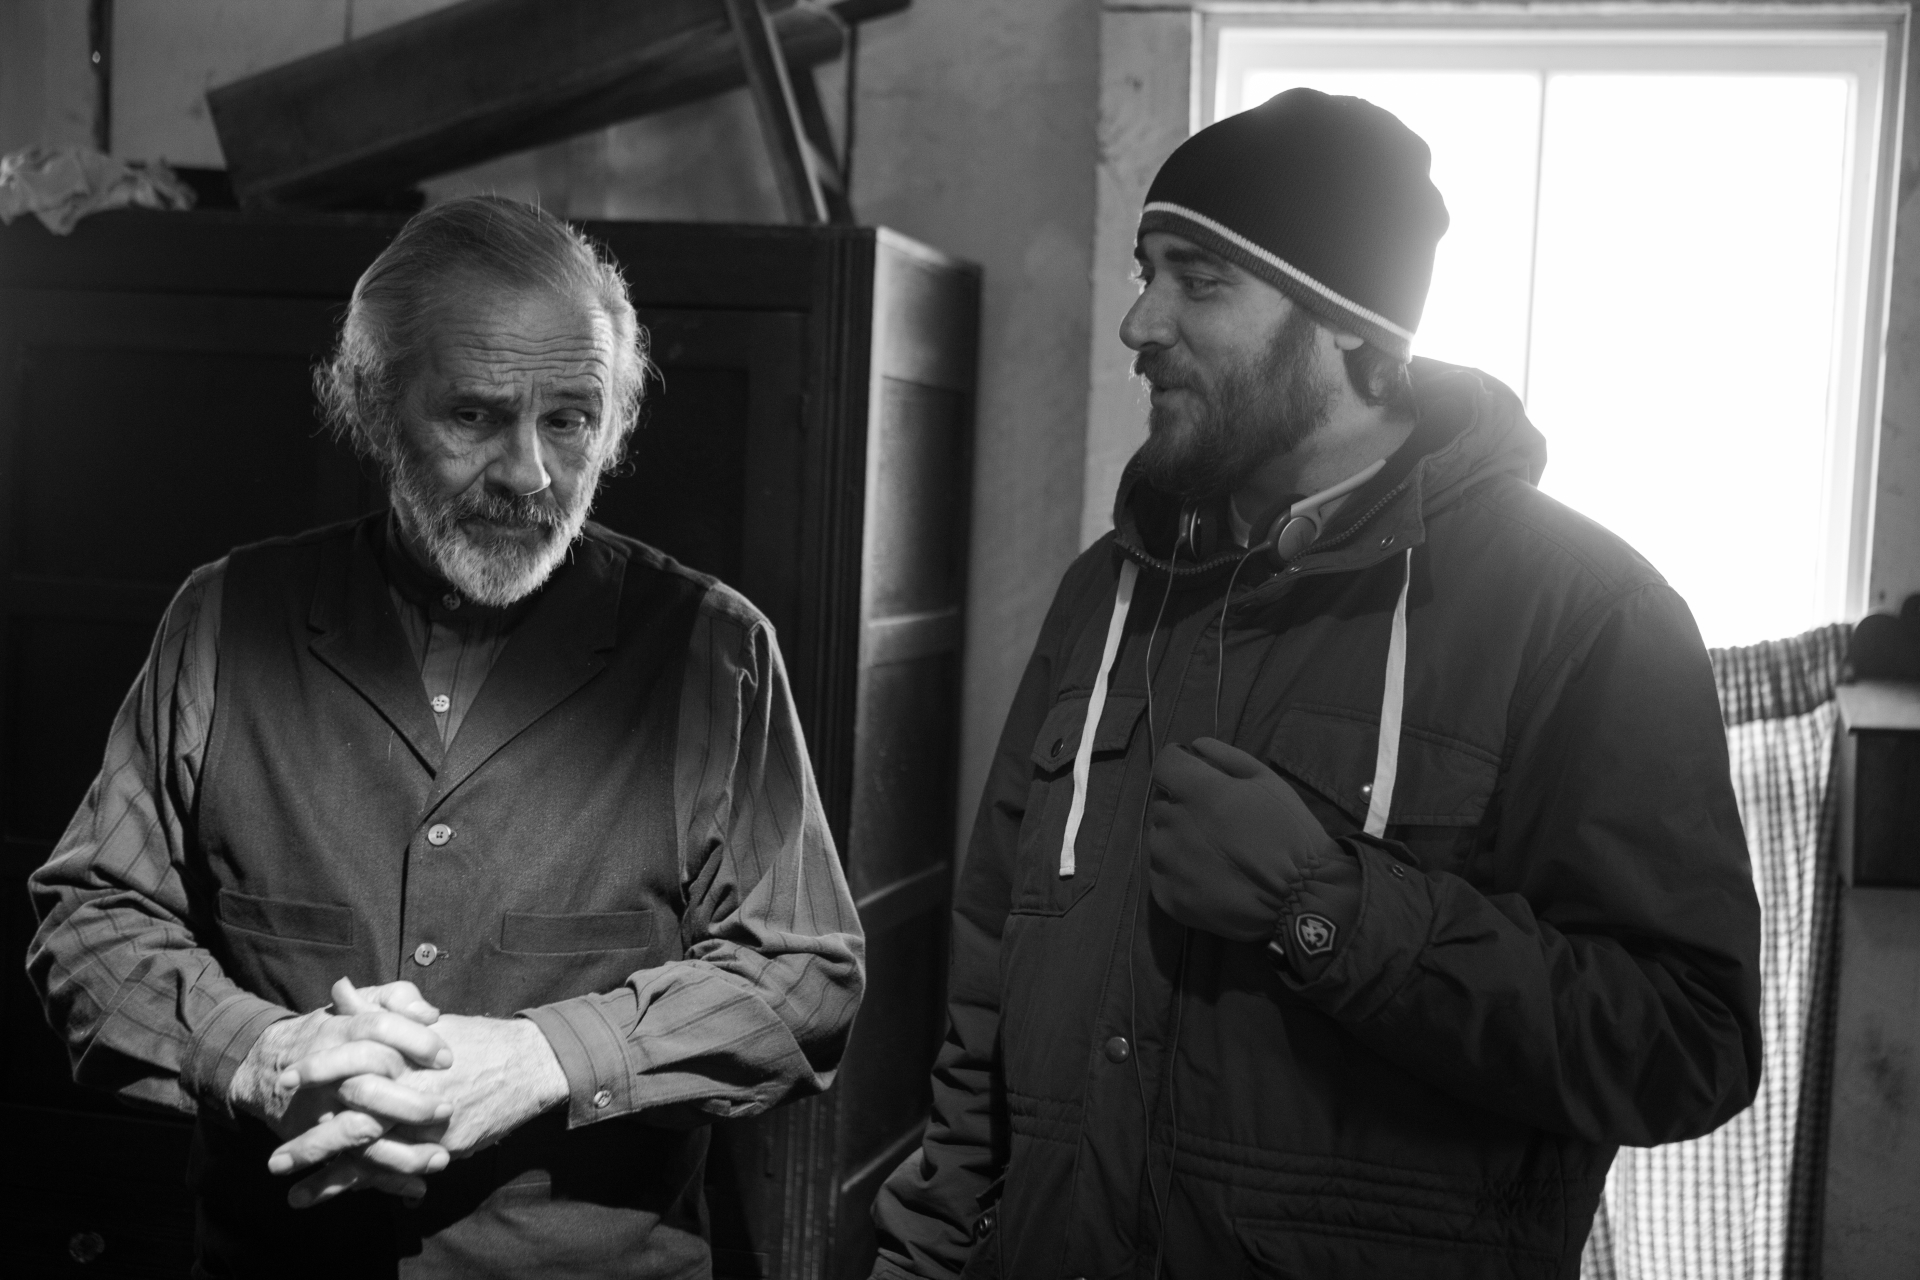 L-R: Pepe Serna (Scarface, American Me, Fandango) discusses a scene with co-director Duane Graves on set of his dark western RED ON YELLA, KILL A FELLA, December, 2012